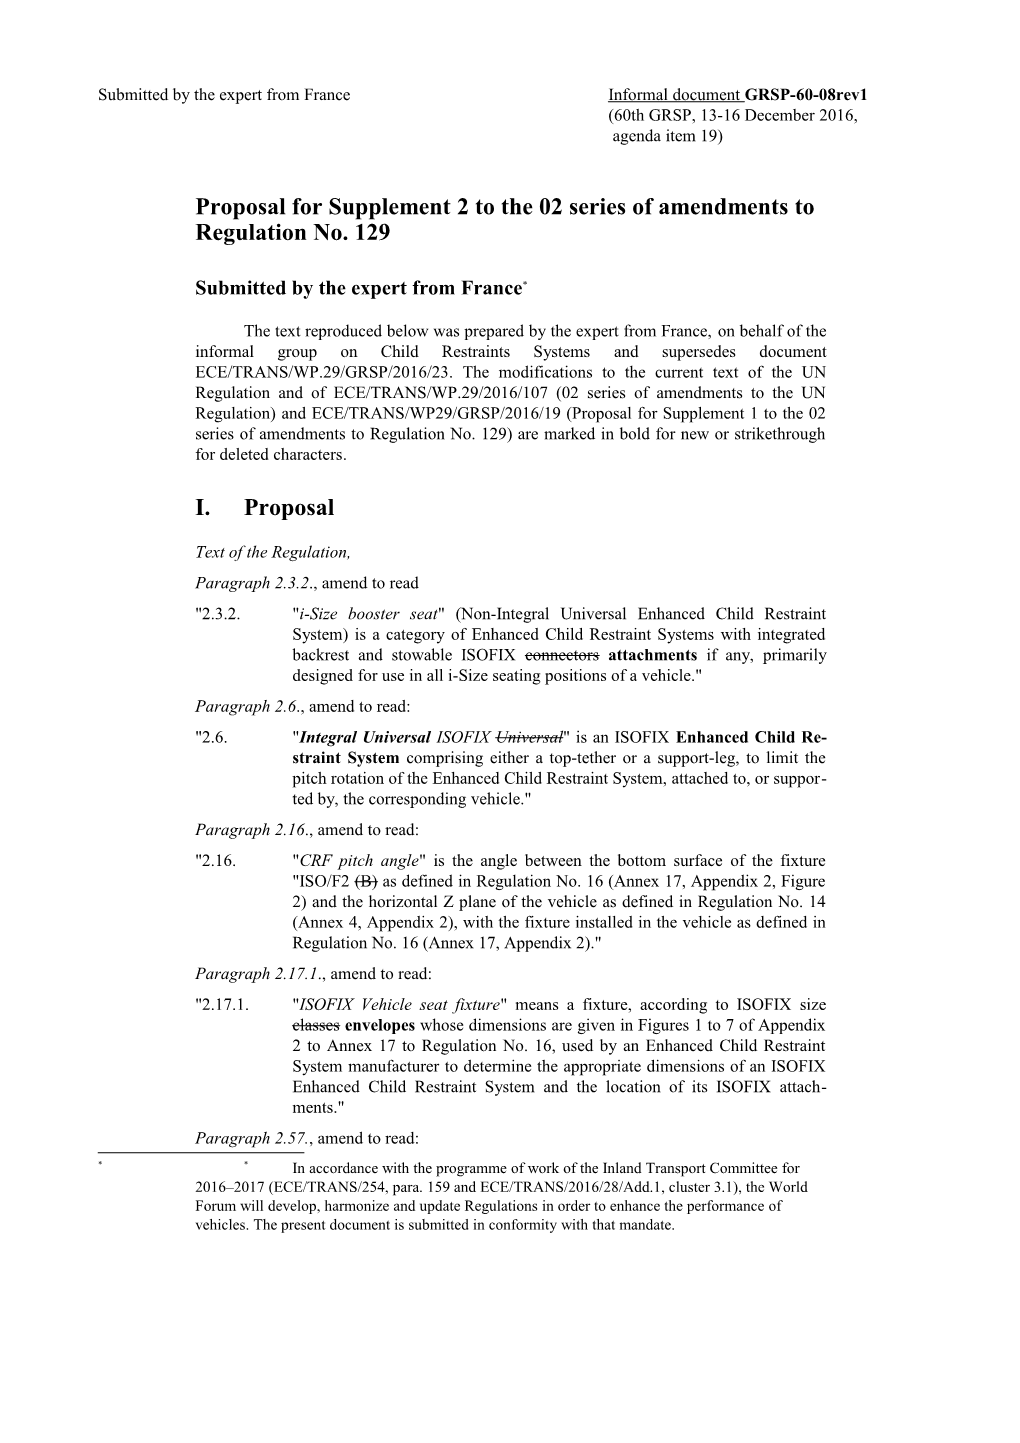 Proposal for Supplement 2 to the 02 Series of Amendments to Regulation No. 129